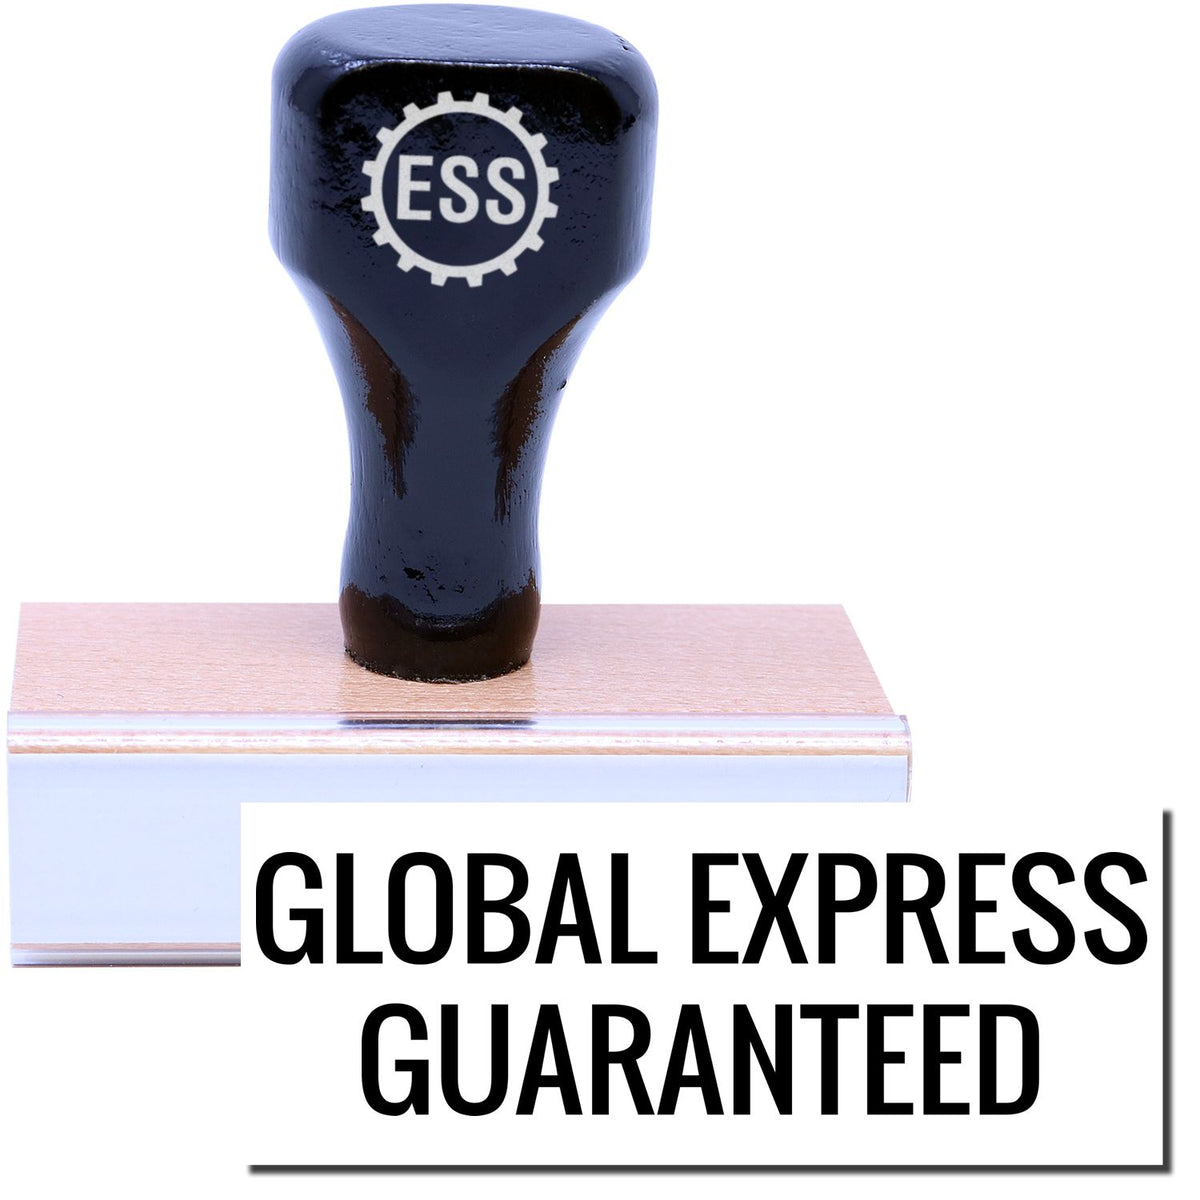 A stock office rubber stamp with a stamped image showing how the text &quot;GLOBAL EXPRESS GUARANTEED&quot; in a large font is displayed after stamping.